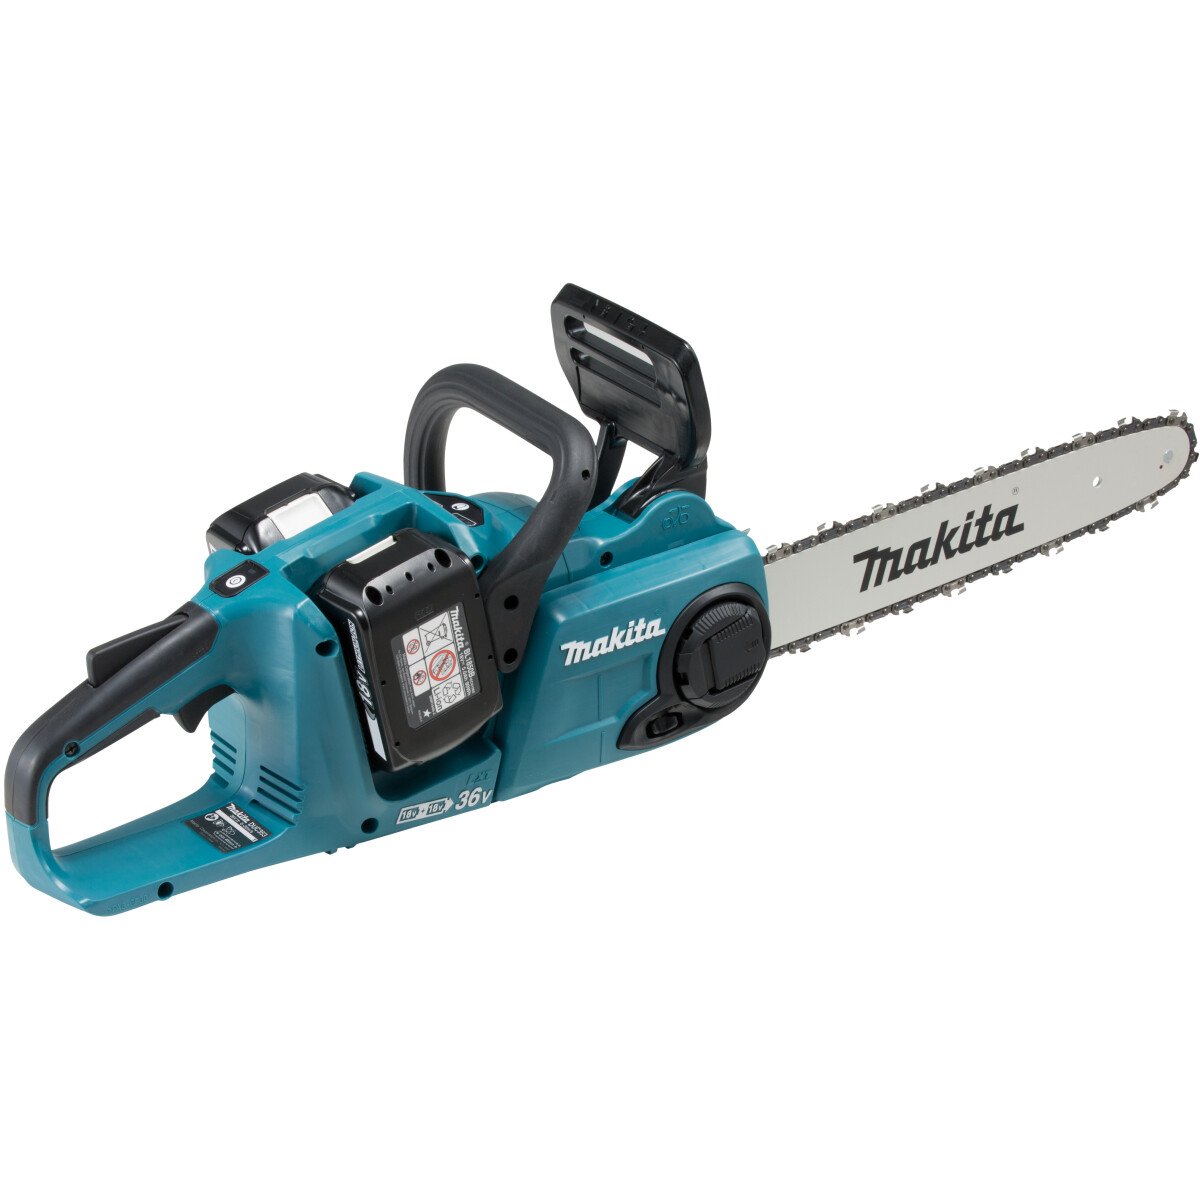 Makita DUC353PG2 Twin 18V Chainsaw 35cm with 2x 6.0Ah Batteries